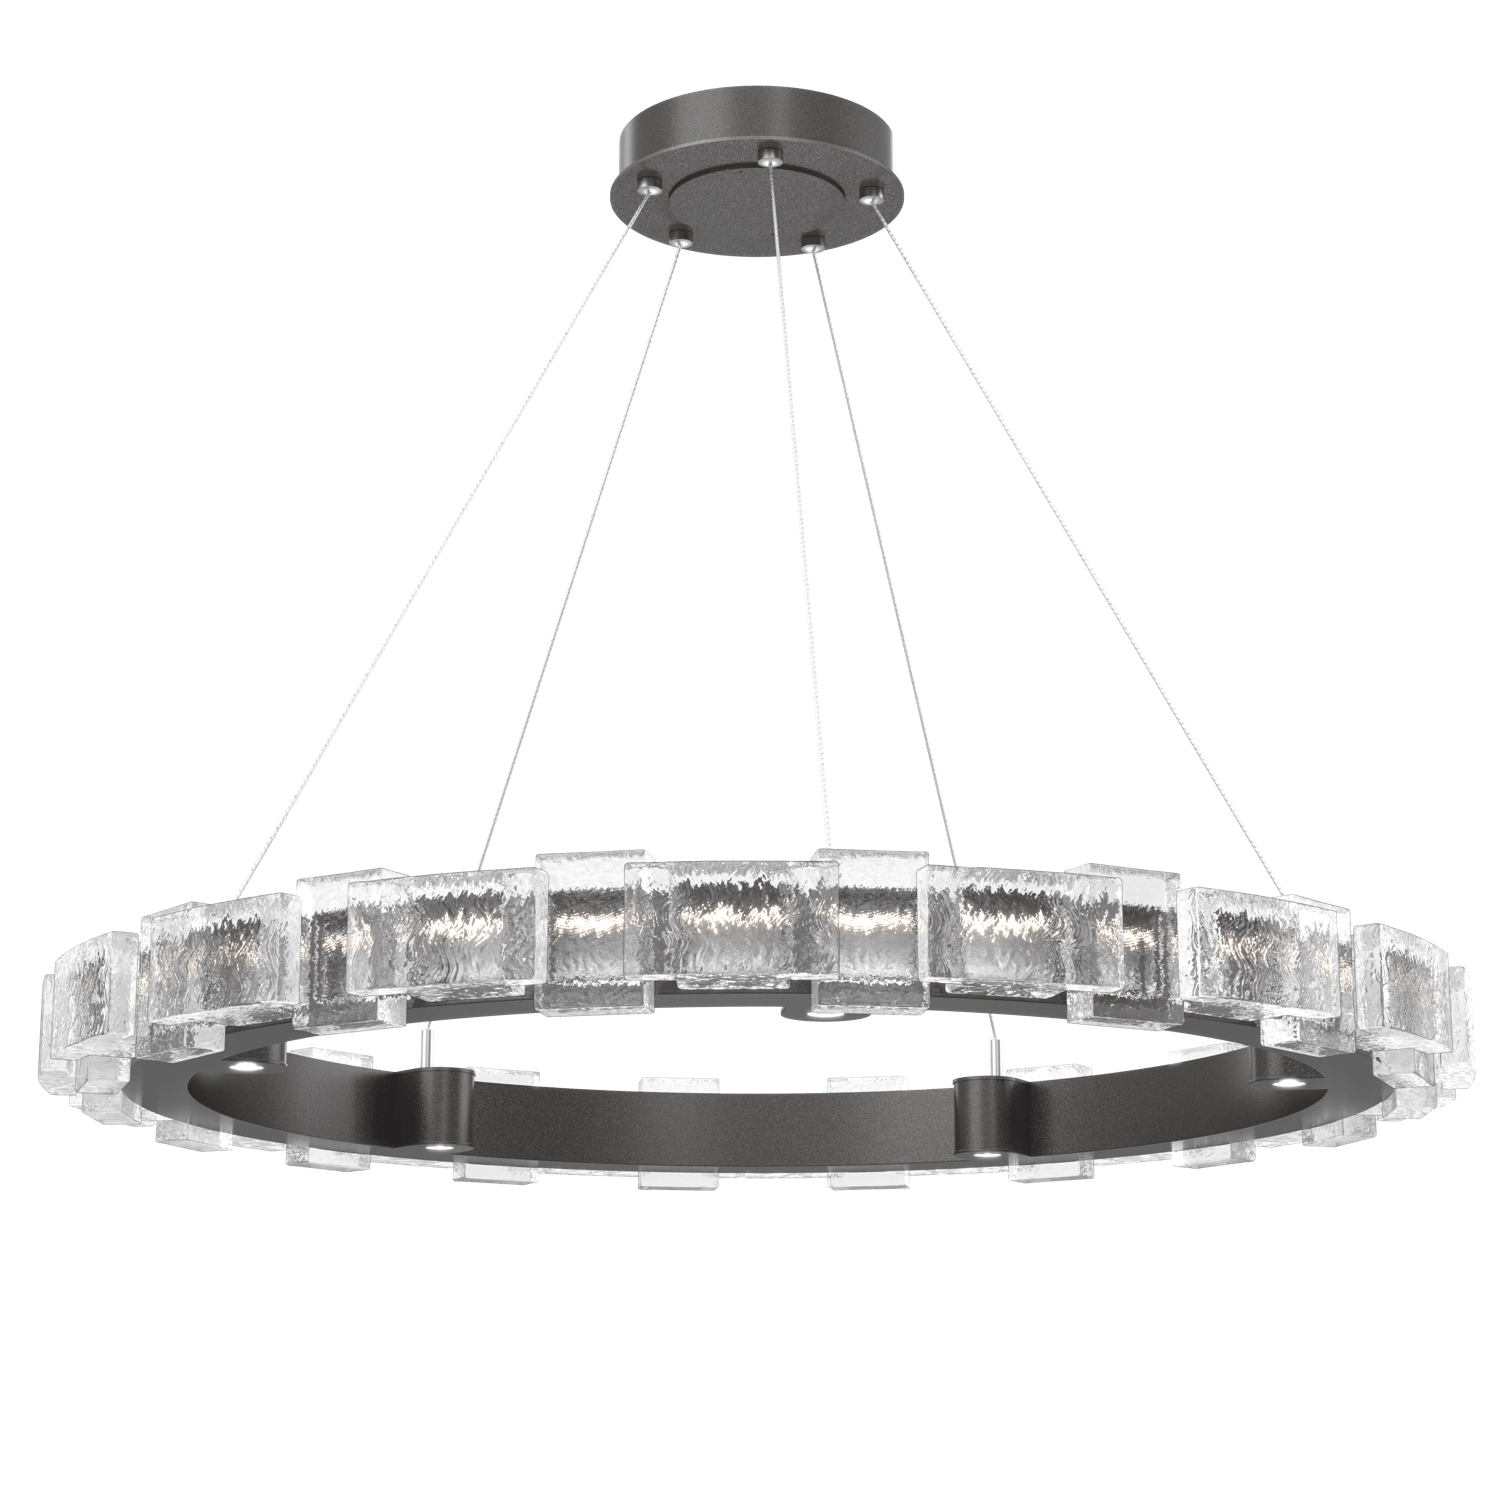 CHB0087-38-GP-TE-Hammerton-Studio-Tessera-38-inch-ring-chandelier-with-graphite-finish-and-clear-tetro-cast-glass-shade-and-LED-lamping